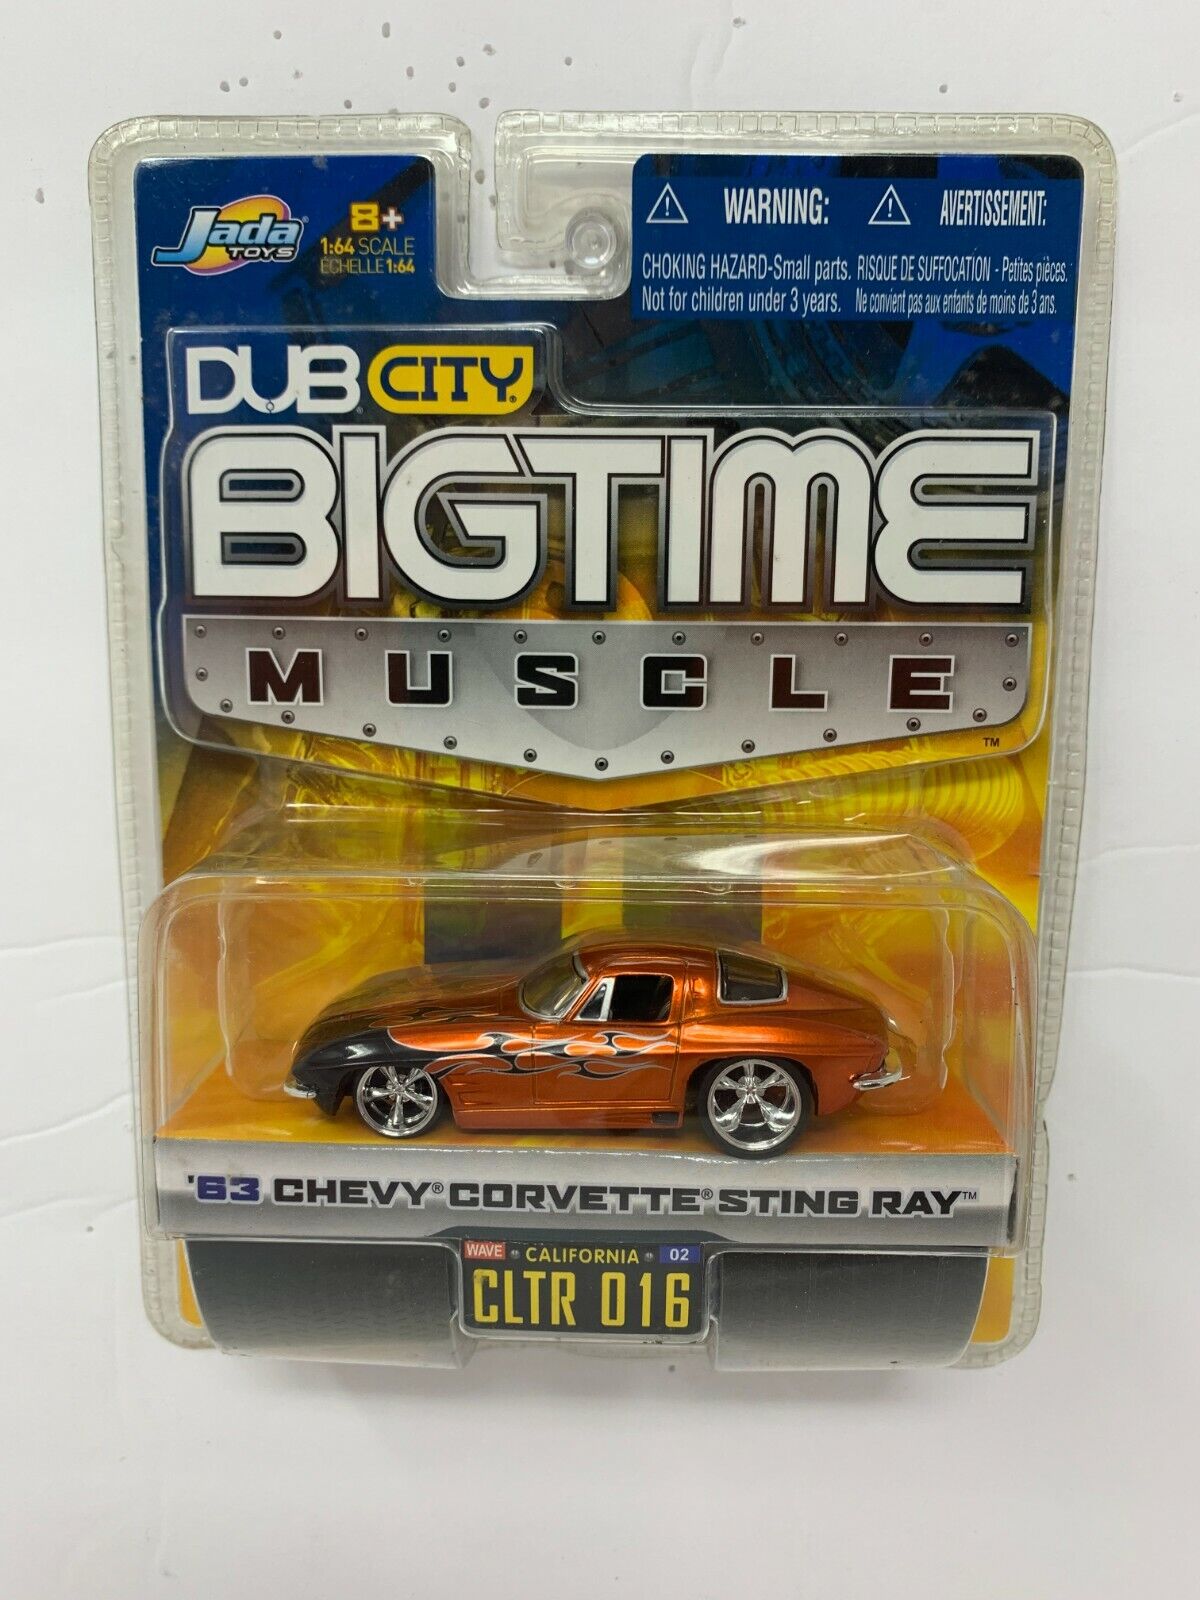 Jada Dub City Bigtime Muscle '63 Chevy Corvette Sting Ray 1:64 Diecast